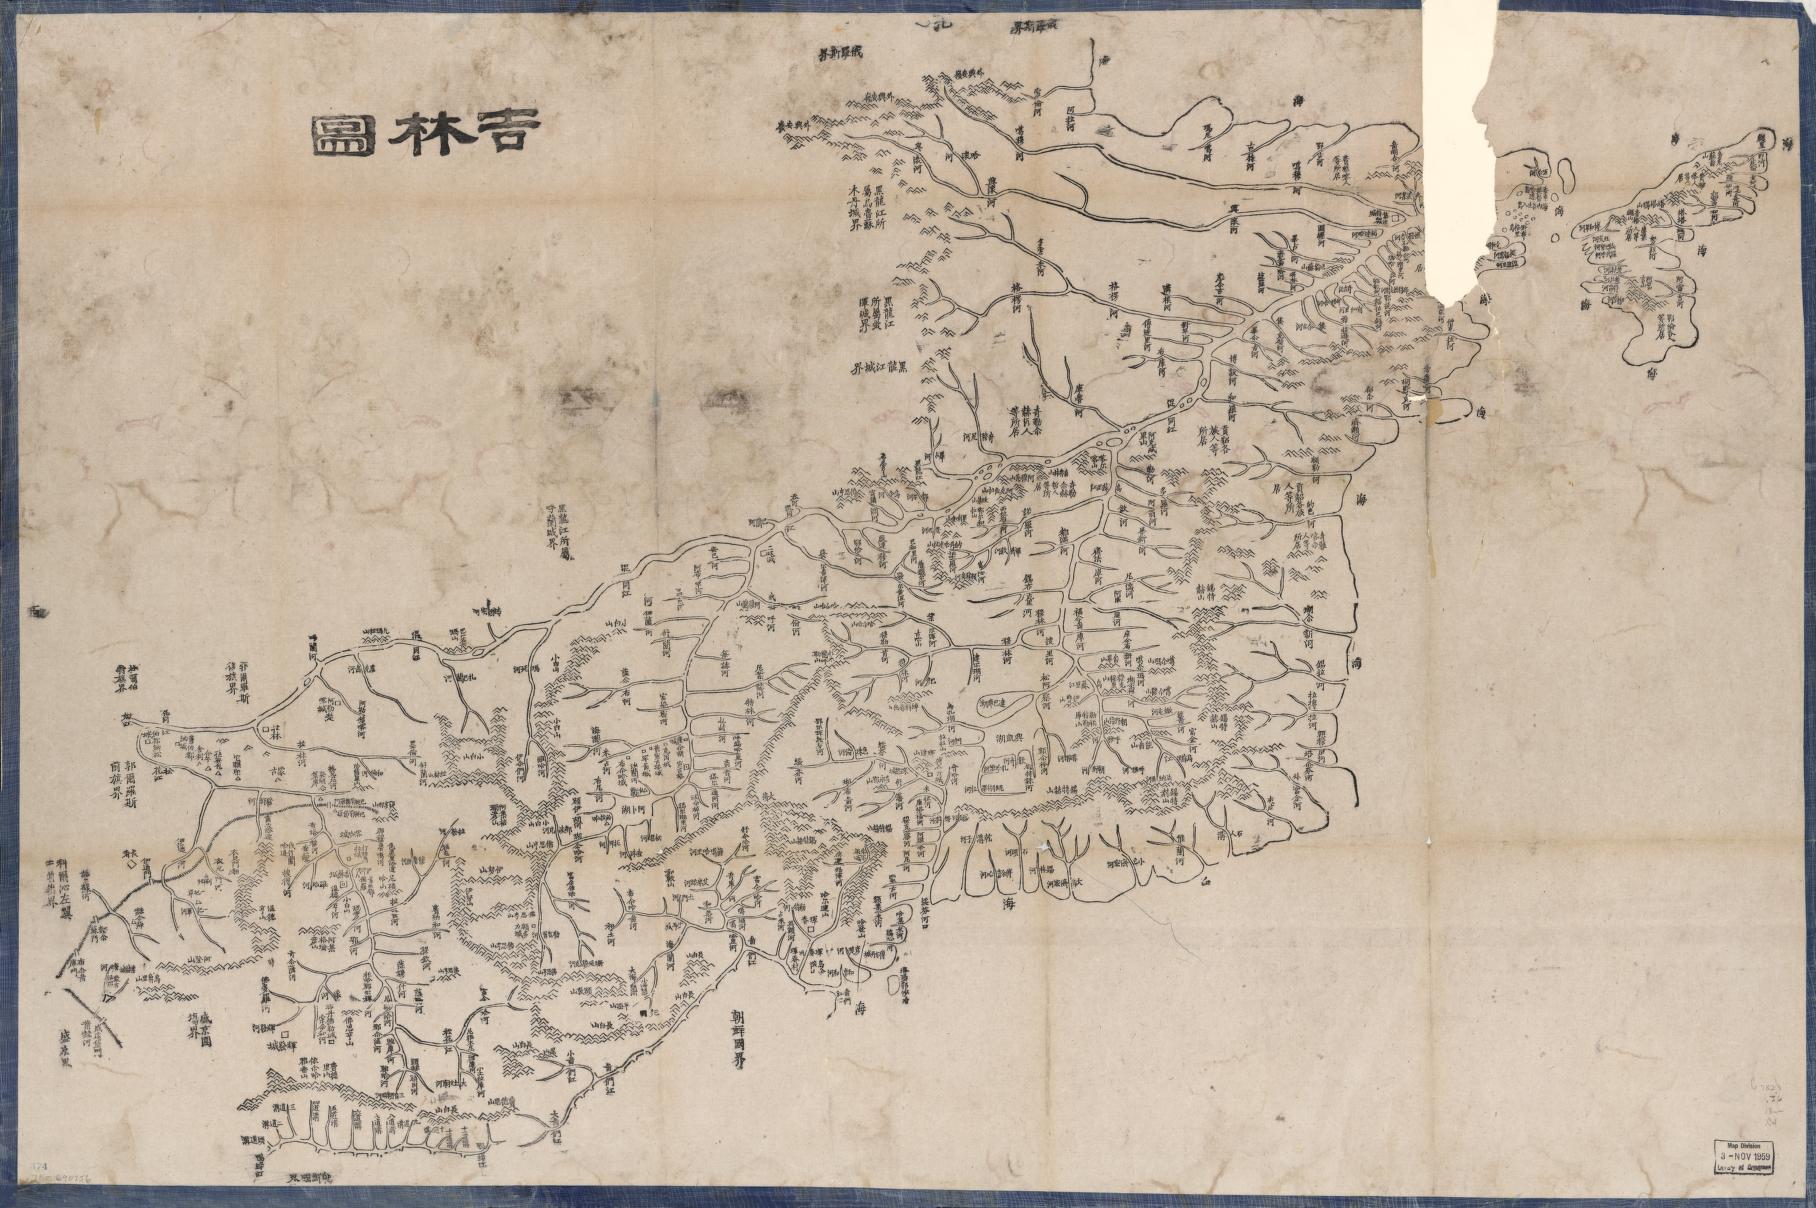 Chinese-language woodblock print map with a tear in the paper in the upper right corner